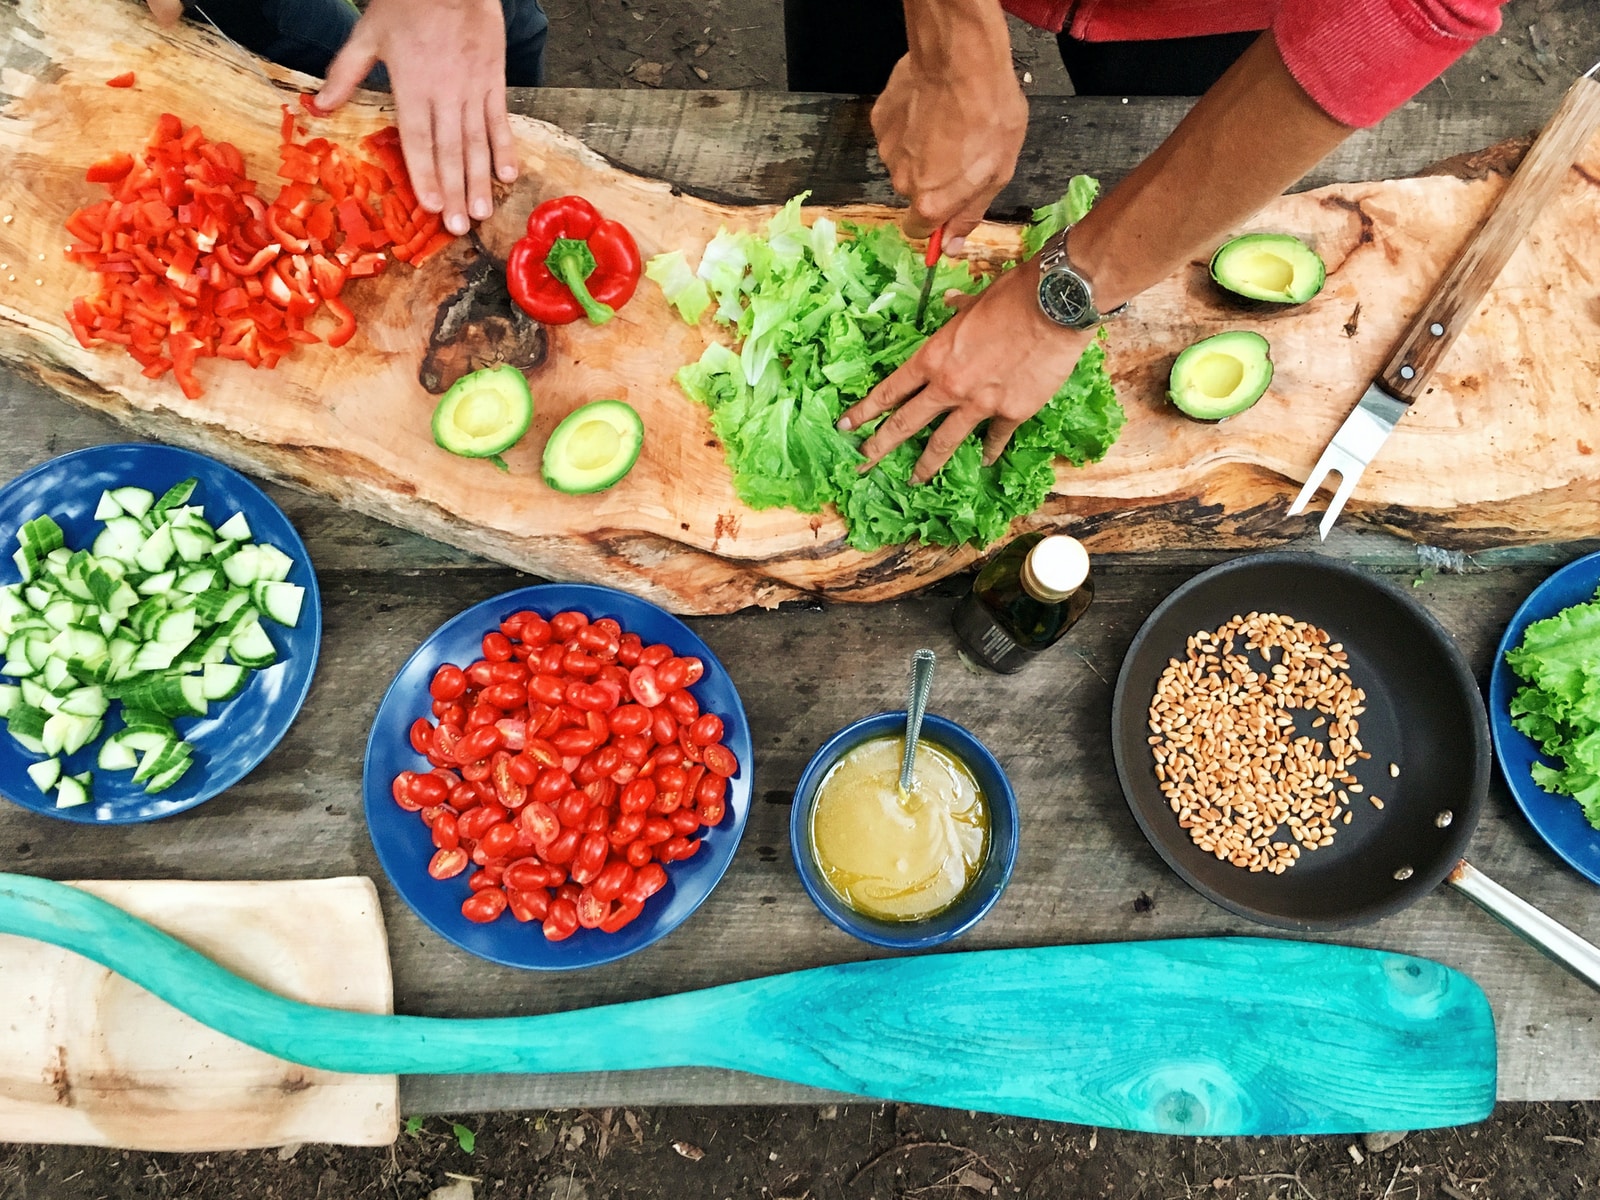 cooking Food Groups Eating Habits Outdoor Kitchen person slicing green vegetable in front of round ceramic plates with assorted sliced vegetables during daytime